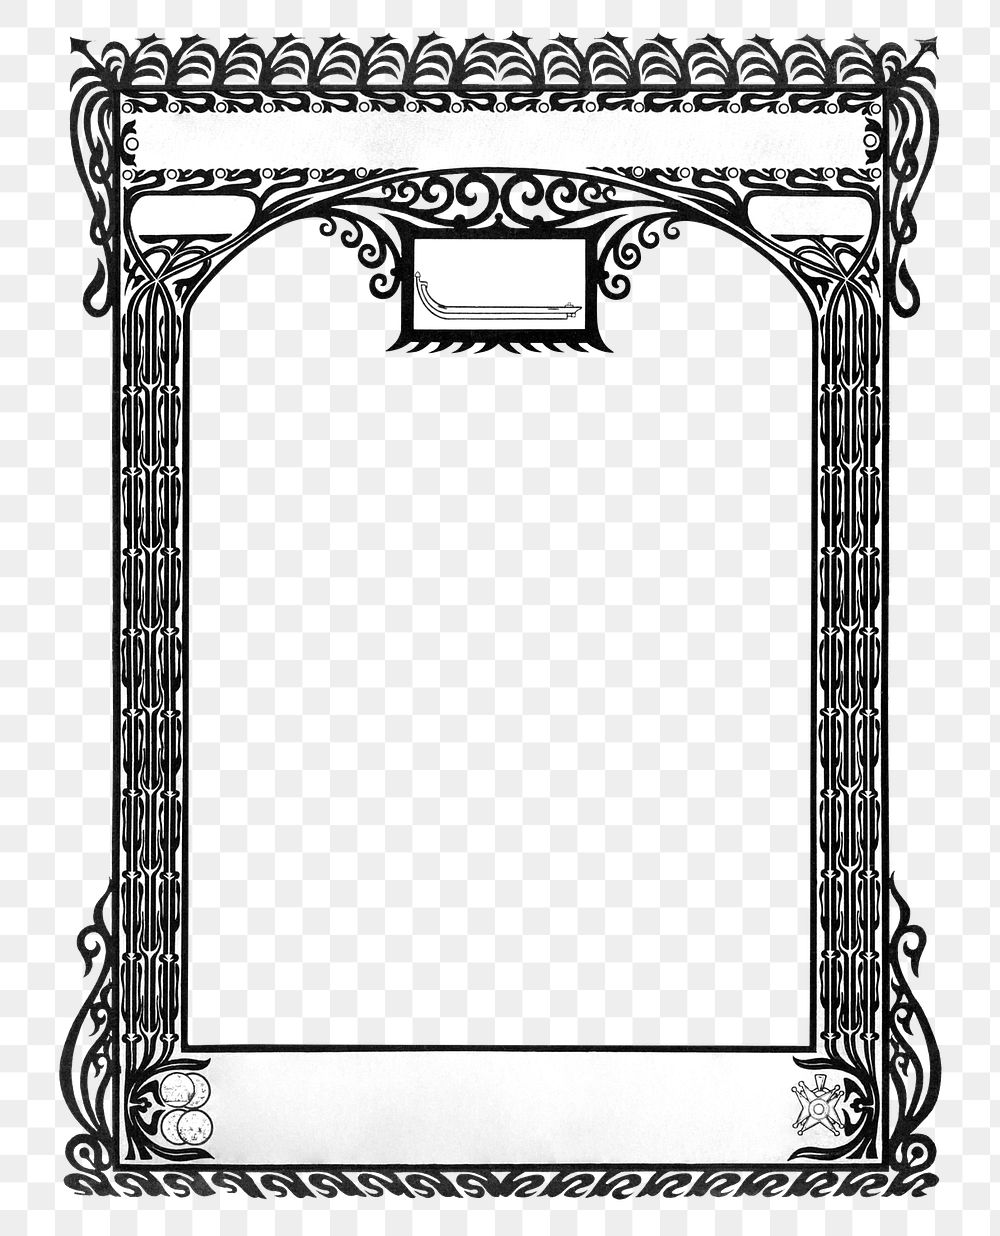 Frame png with vintage black border, remixed from the artworks by Johann Georg van Caspel